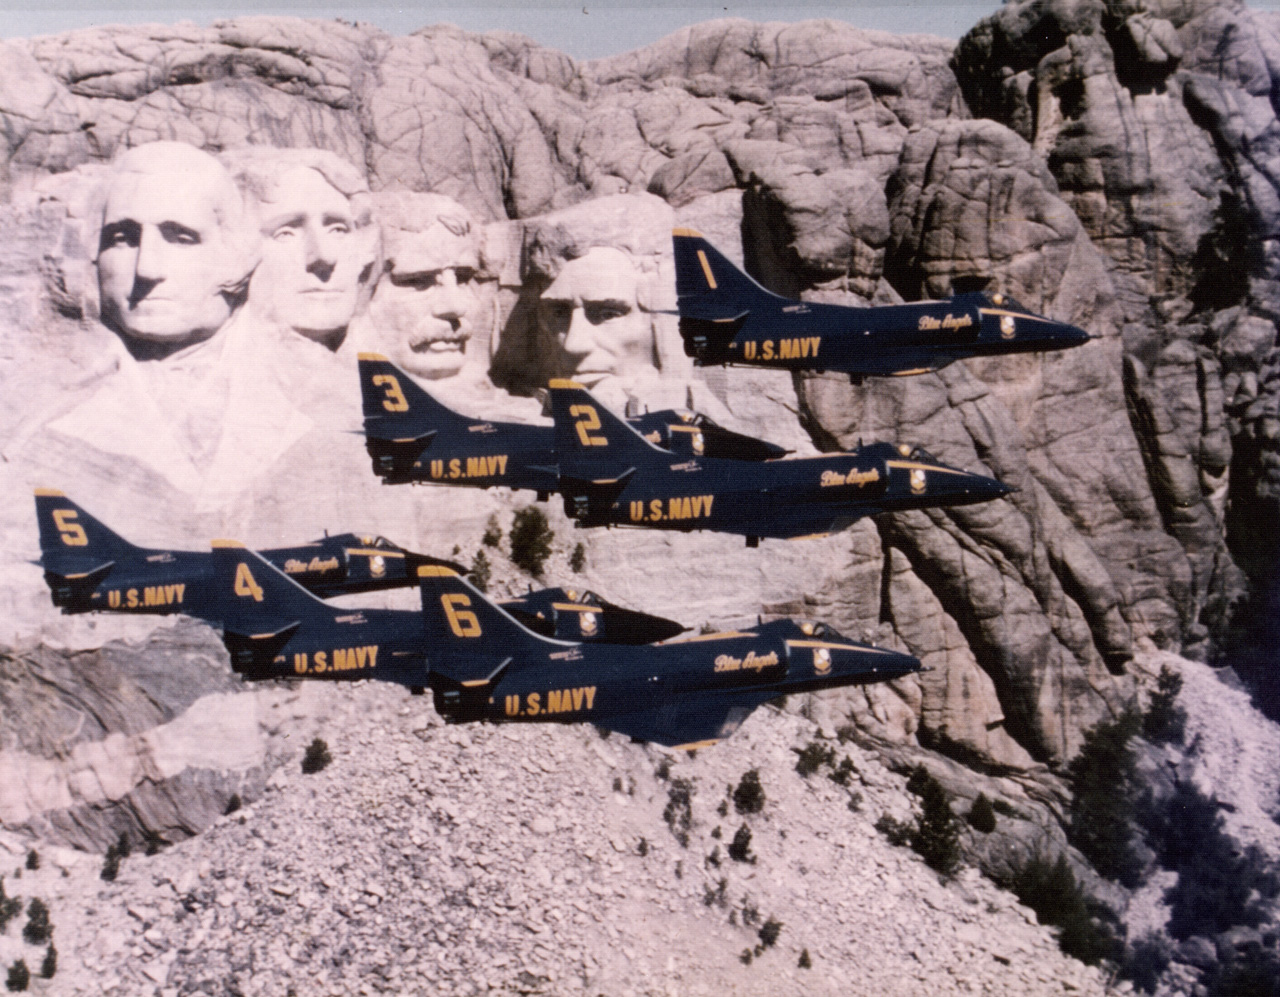 <em>The Blue Angels fly their Skyhawks in close formation past Mount Rushmore (U.S. Navy)</em>